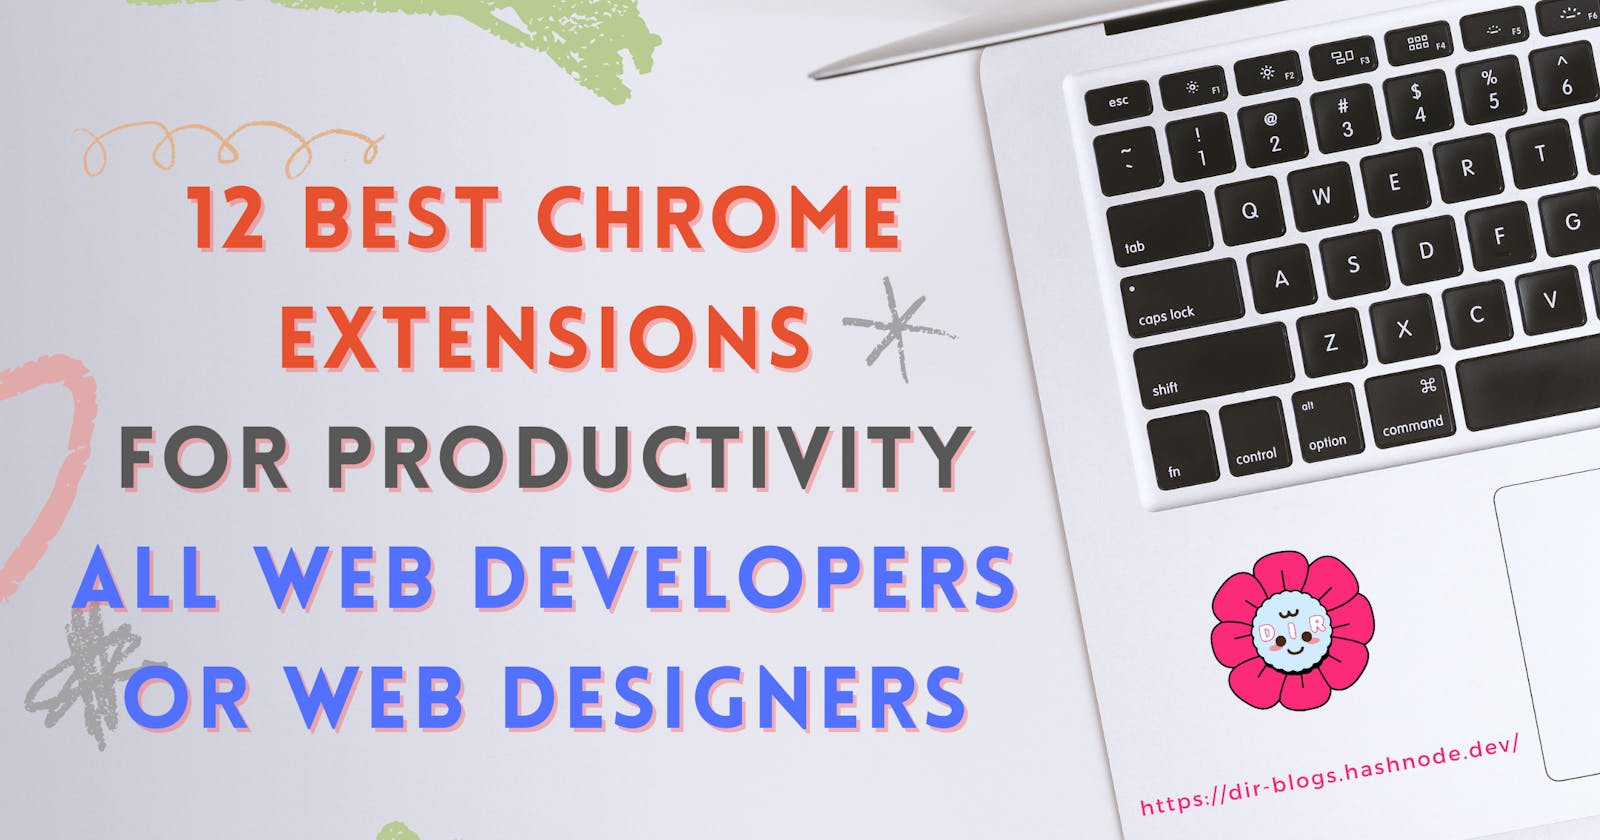 🏆 Best Chrome Extensions For Productivity All Web Developers & Web Designers! 👩‍💻👨‍💻